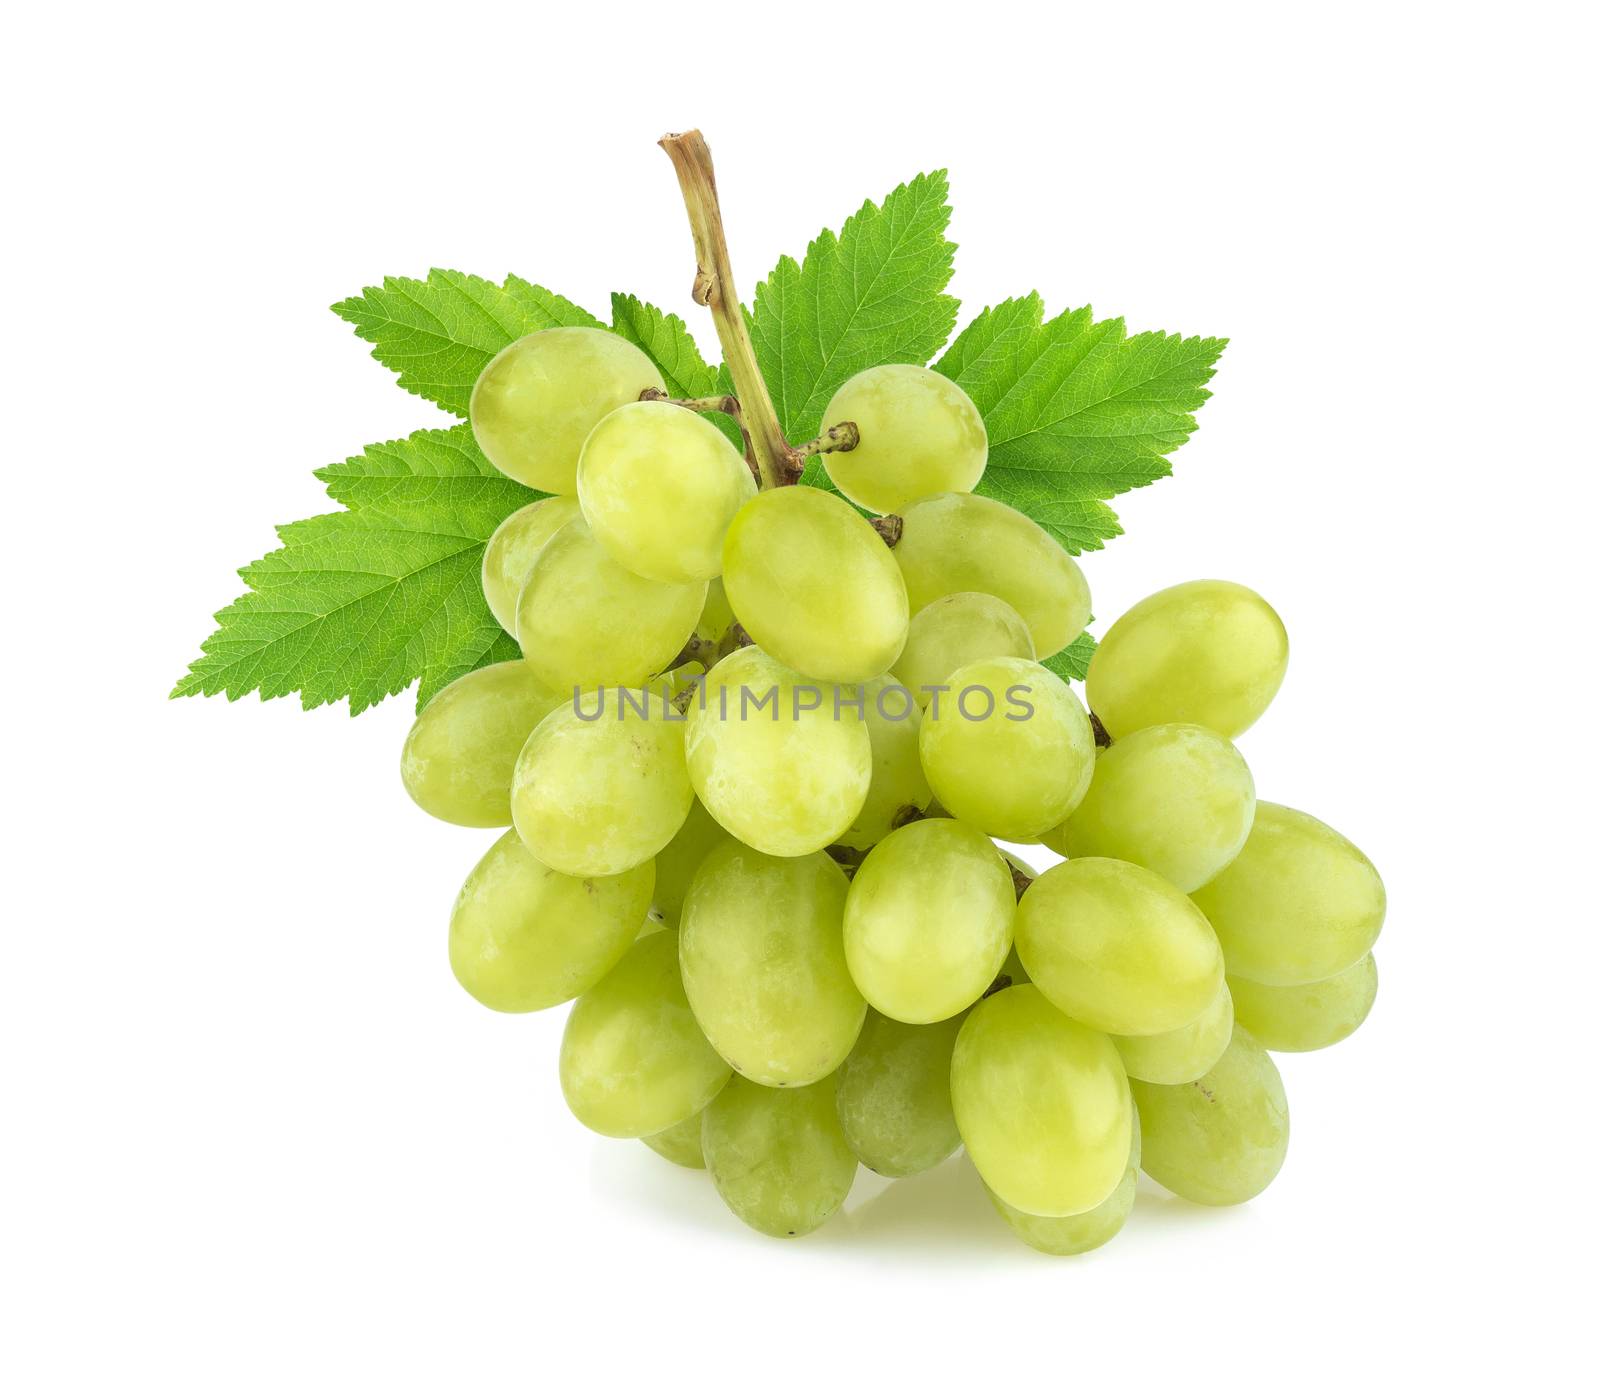 Green grape with leaves isolated on white background. Studio shot